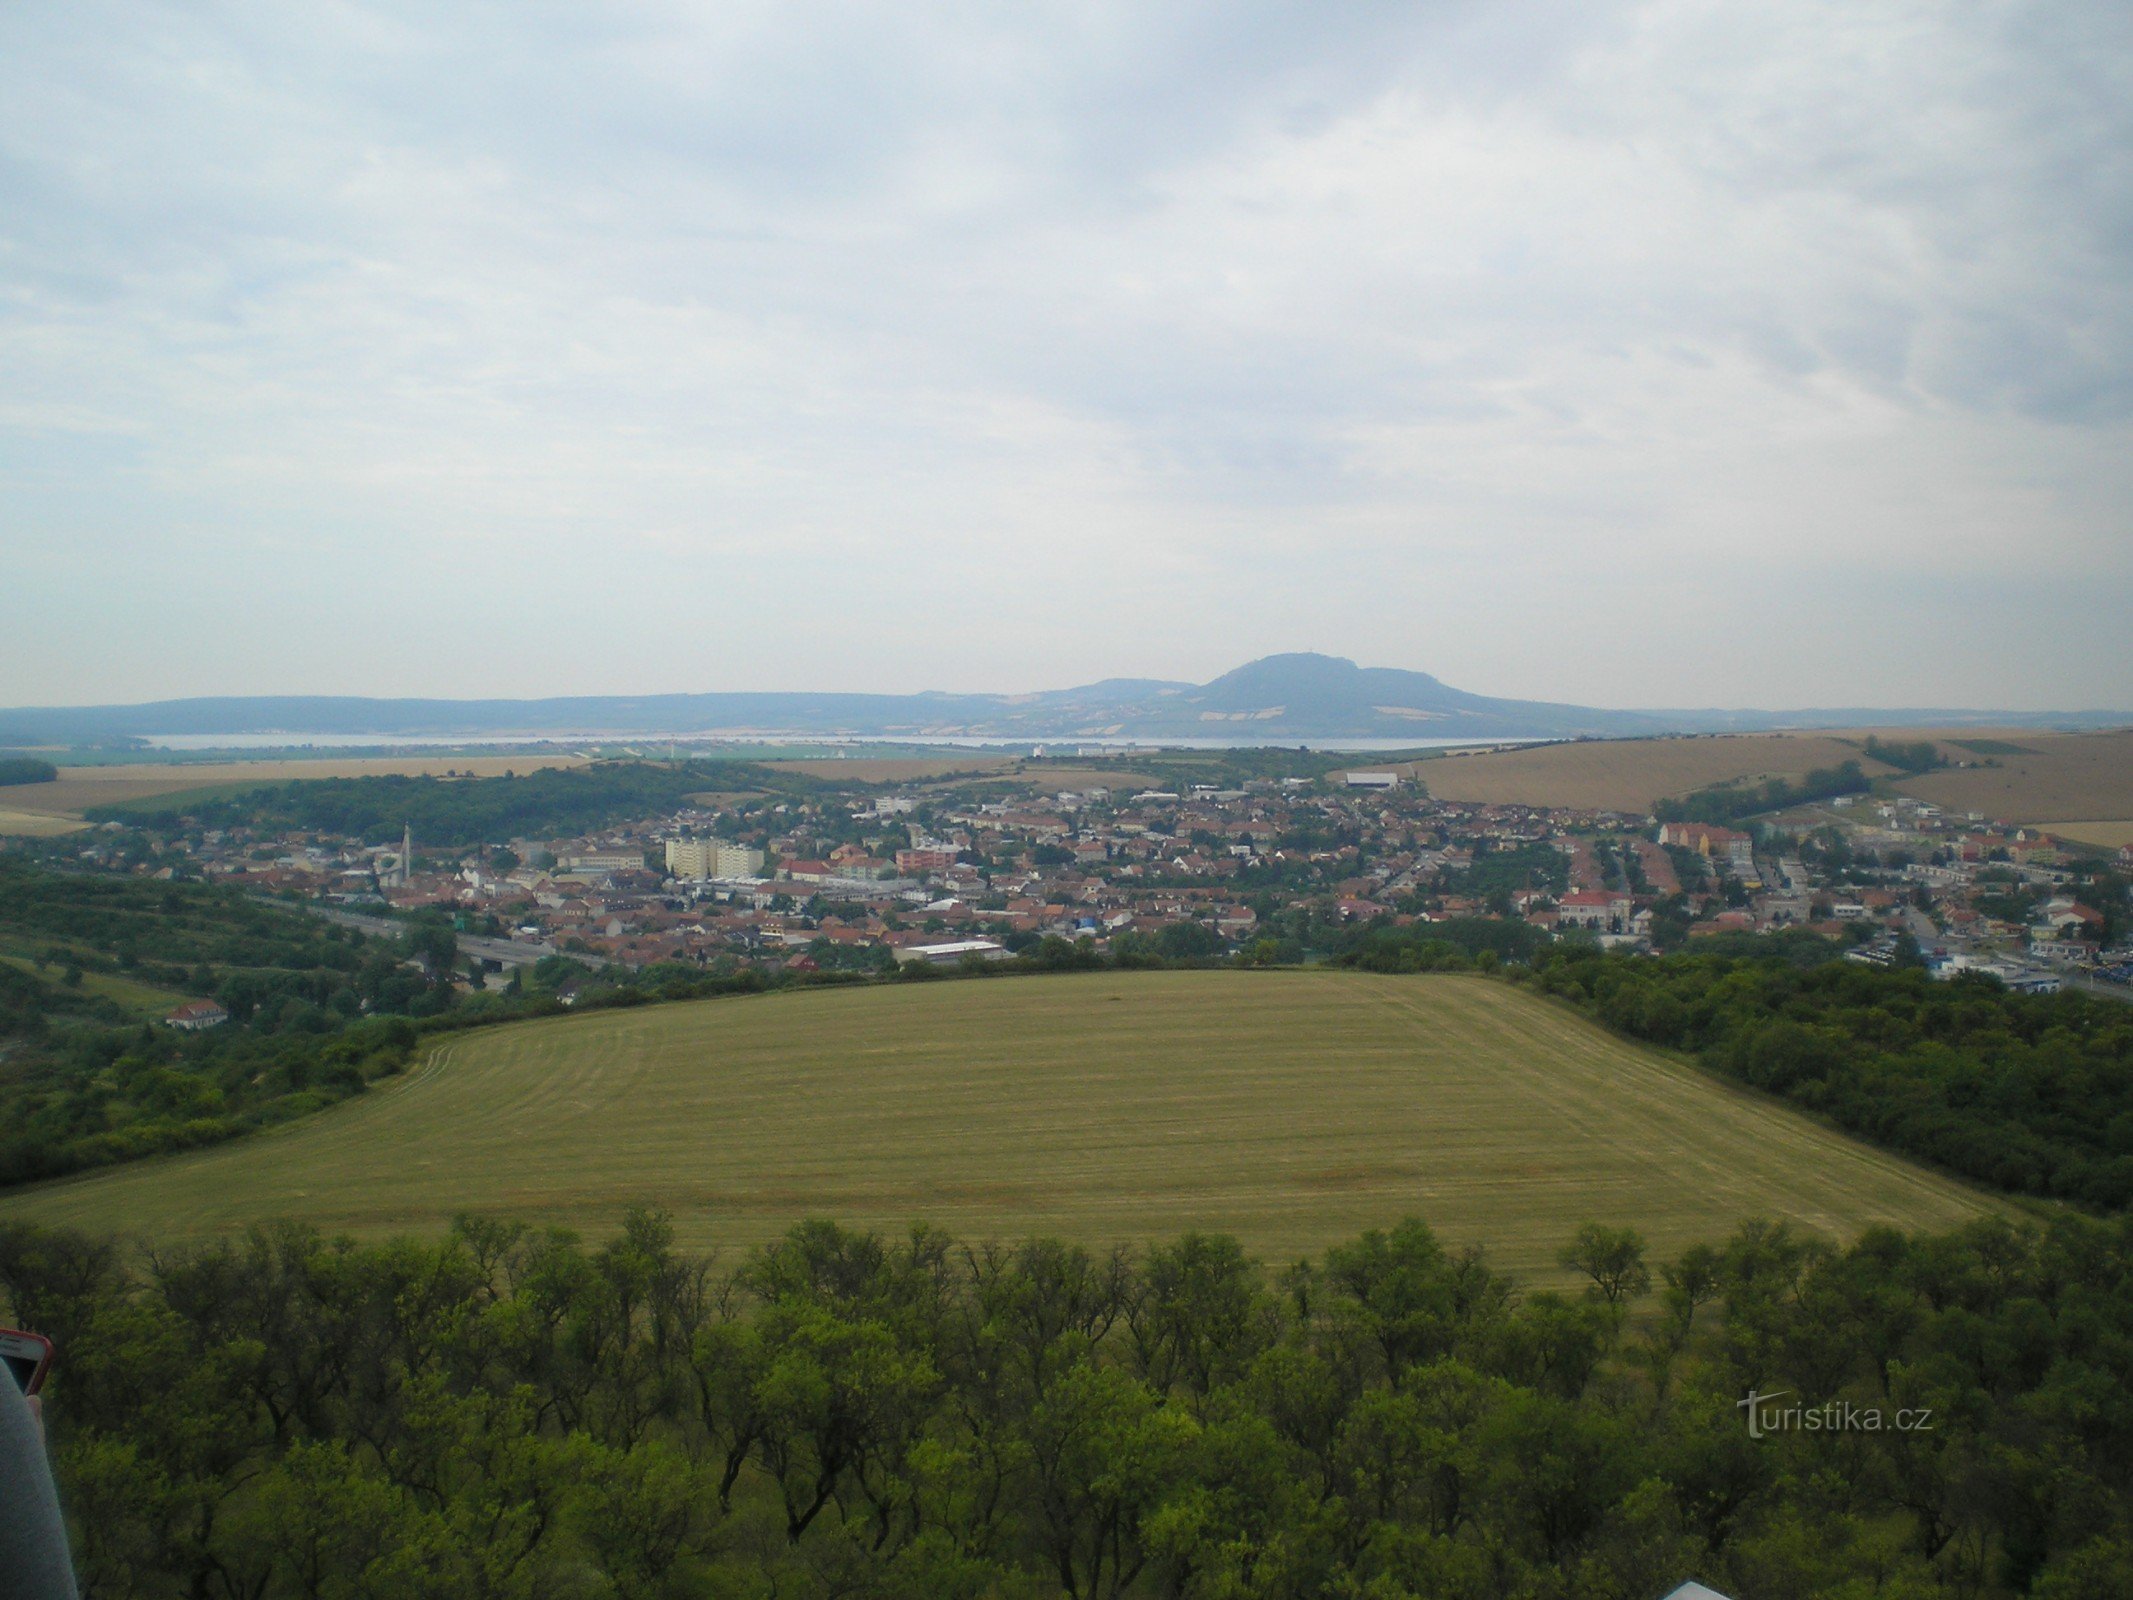 Almond orchard and Hustopeče